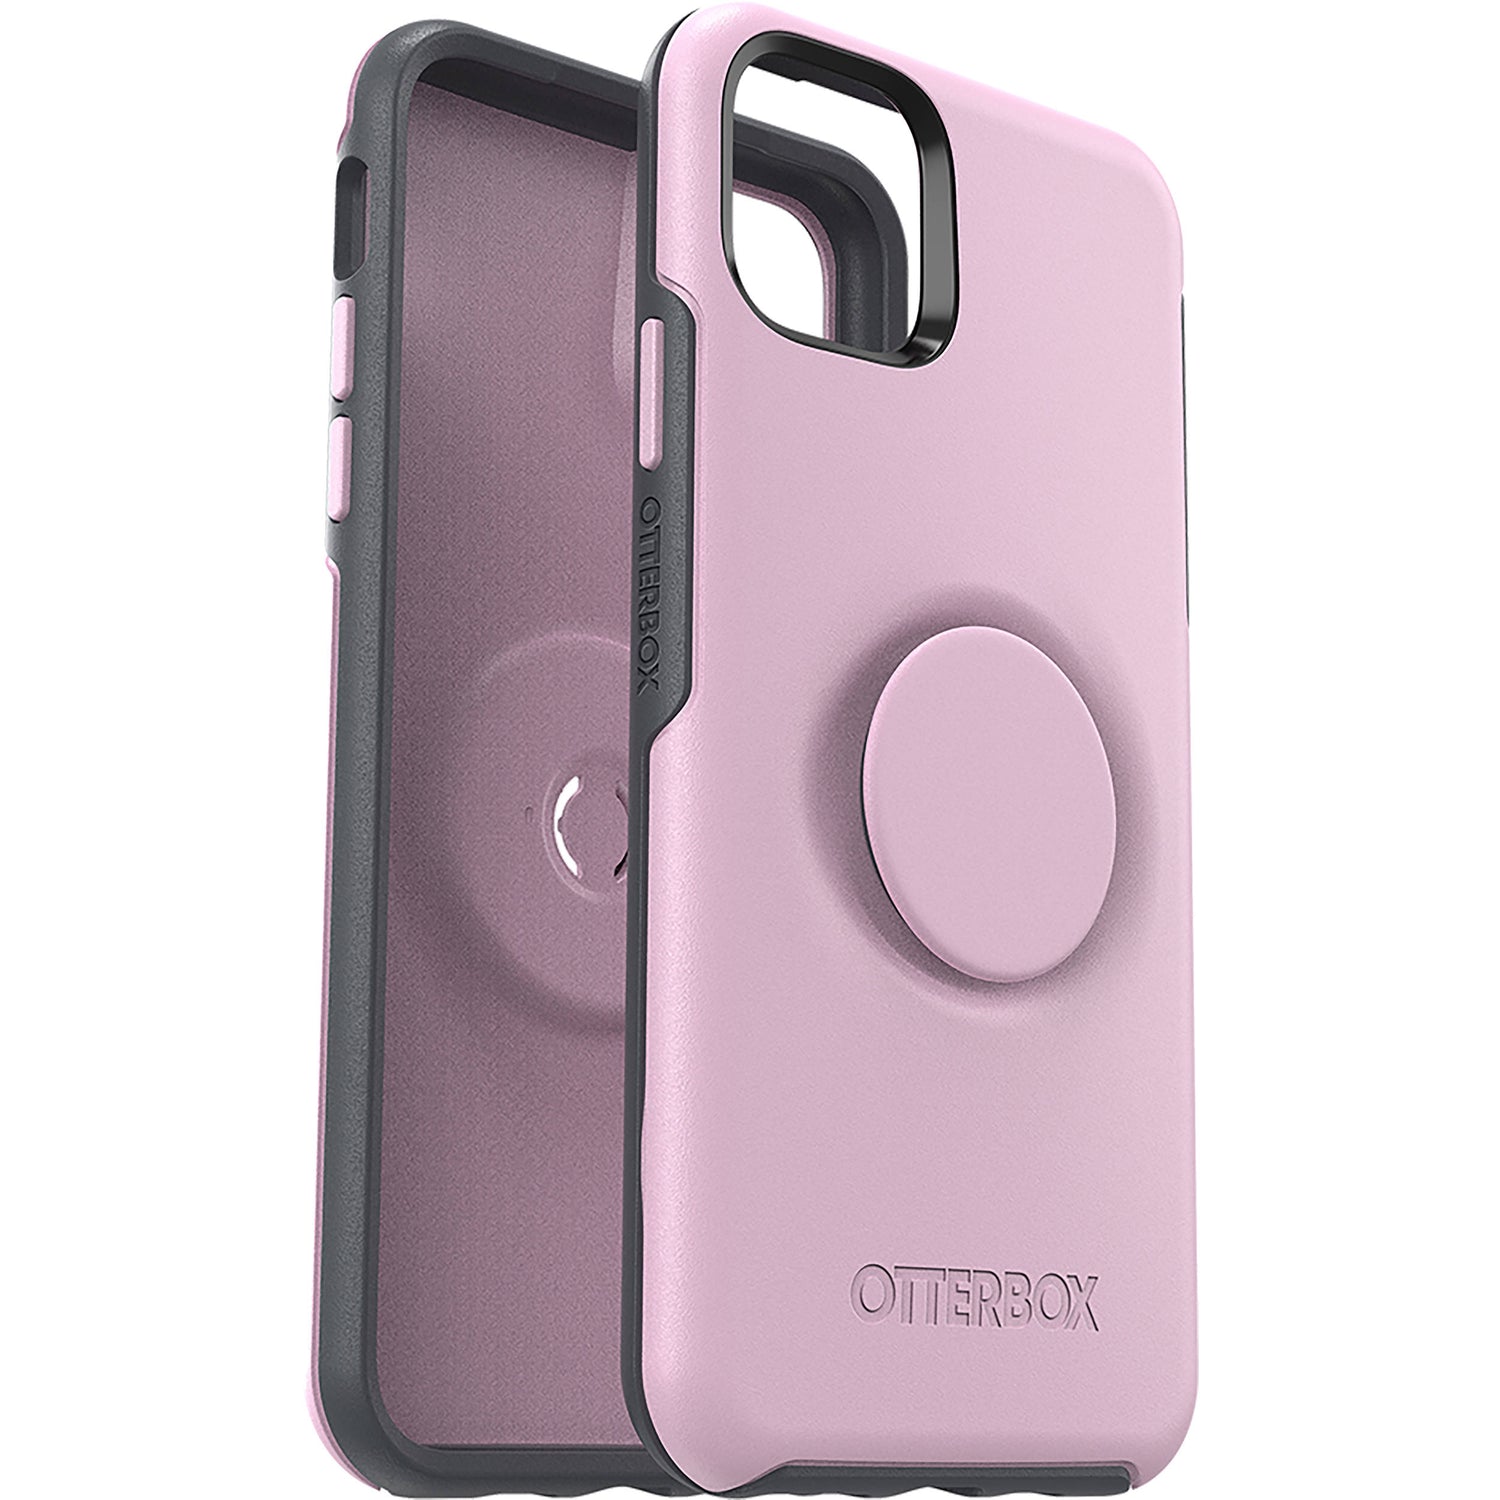 OtterBox + POP Case for Apple iPhone 11 Pro Max - Mauveolous (Certified Refurbished)